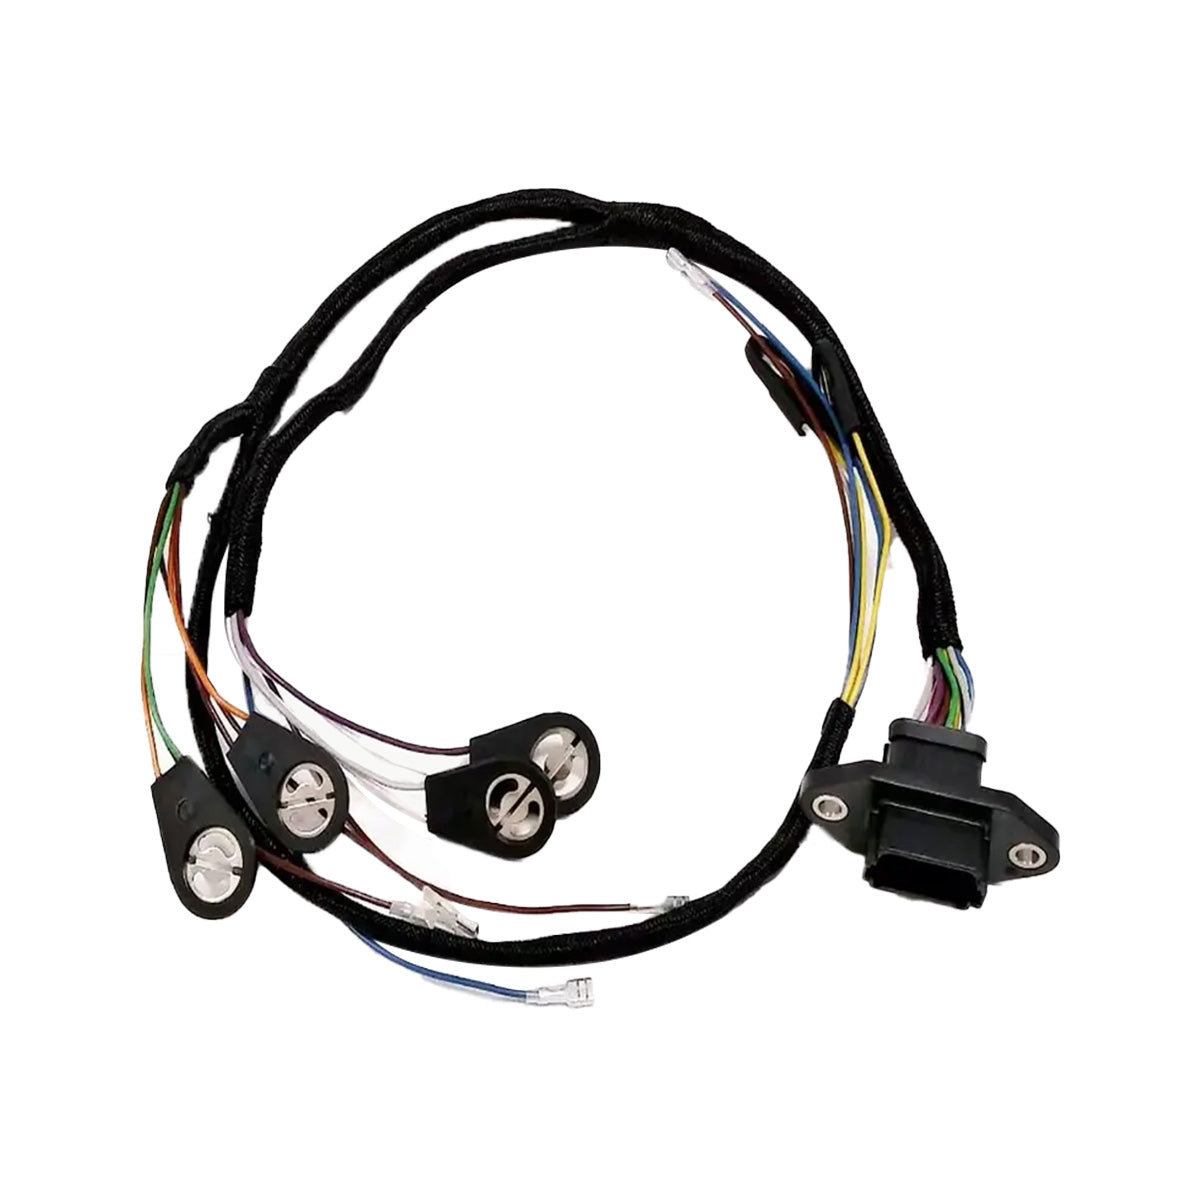 21375562 NEW WIRING HARNESS - Hudson County Motors is a heavy